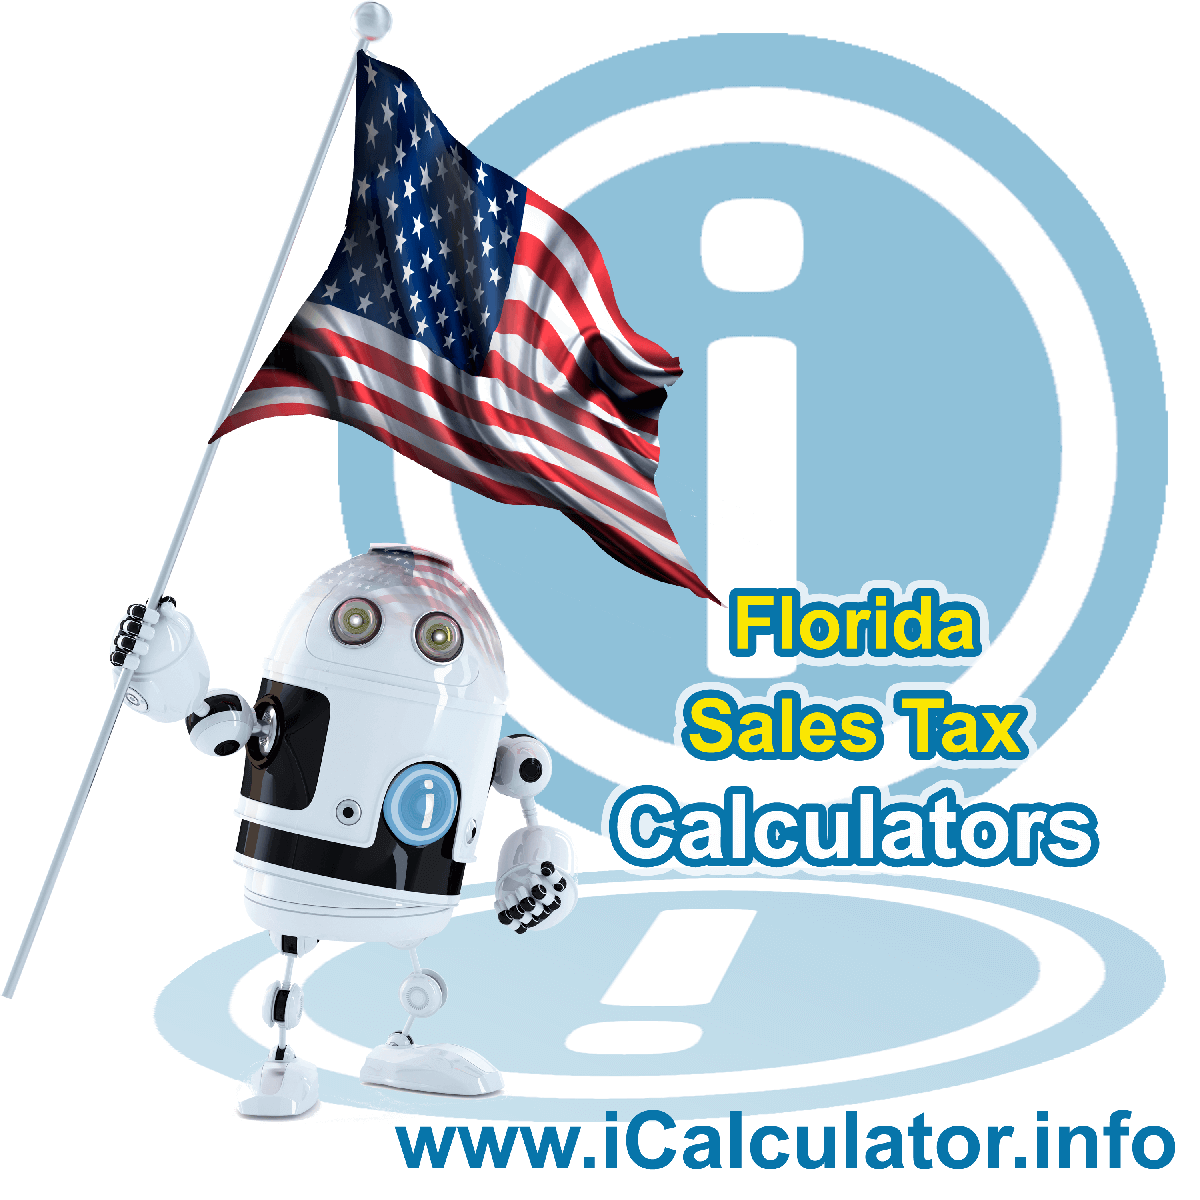 Pembroke Pines Sales Rates: This image illustrates a calculator robot calculating Pembroke Pines sales tax manually using the Pembroke Pines Sales Tax Formula. You can use this information to calculate Pembroke Pines Sales Tax manually or use the Pembroke Pines Sales Tax Calculator to calculate sales tax online.